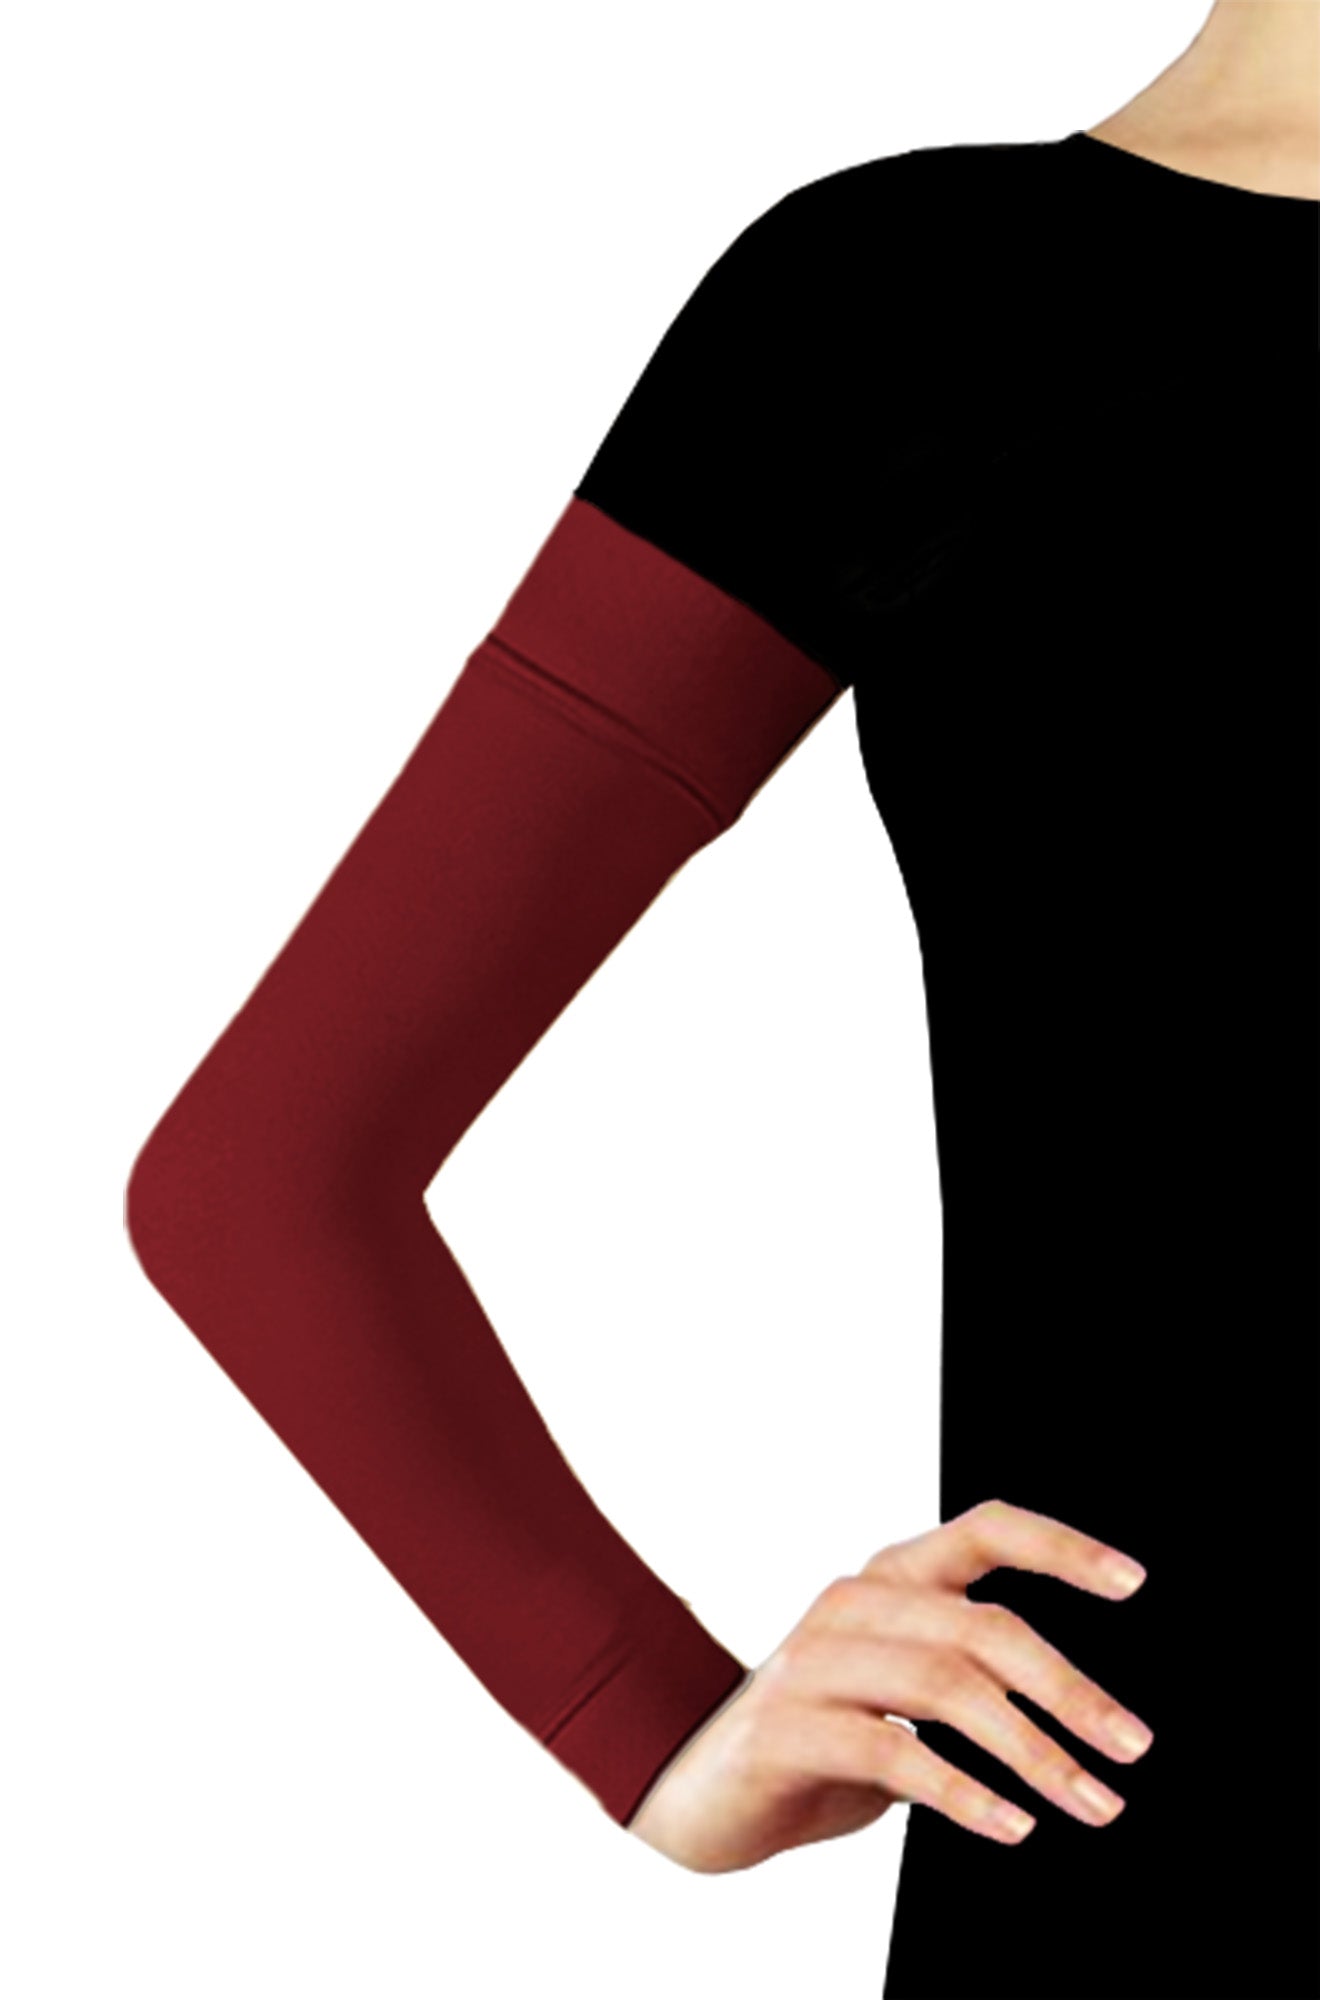 Wholesale Cotton Arm Sleeves Long Stretchy Breathable Arm sleeve covers